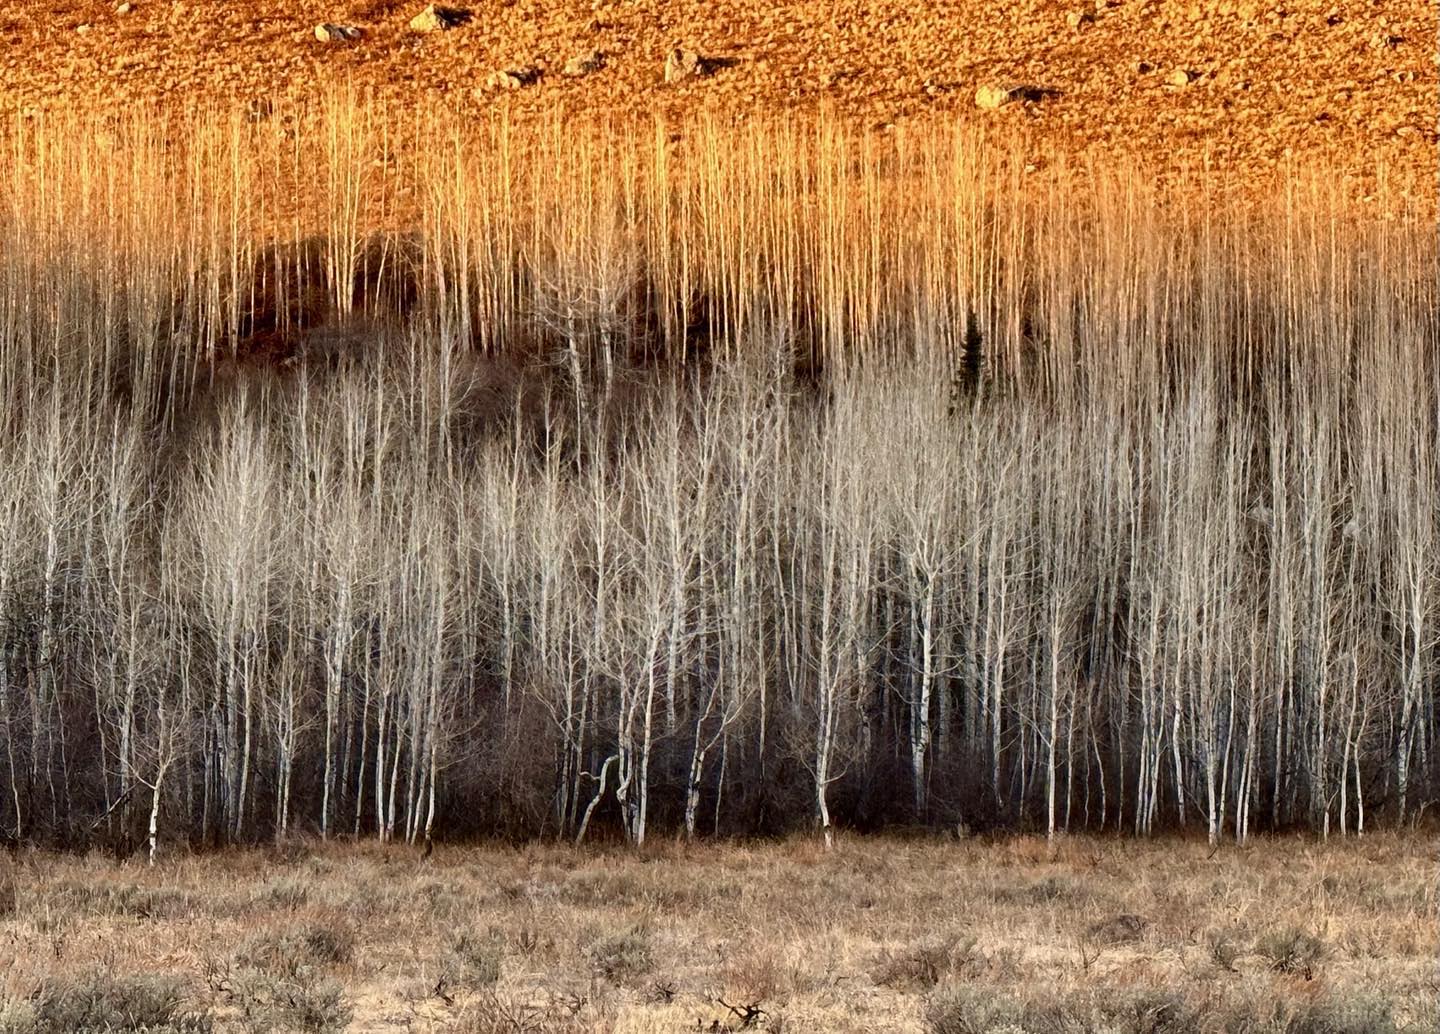 Silver and Gold - a stand of Aspen in Teton Canyon late this afternoon. The lower row is in shadow with the back row still in sunlight. Aspens grow in clonal colonies often derived from a single seedling, and spread from the rhizomatic nature of their root system, sending up suckers that become full trees.